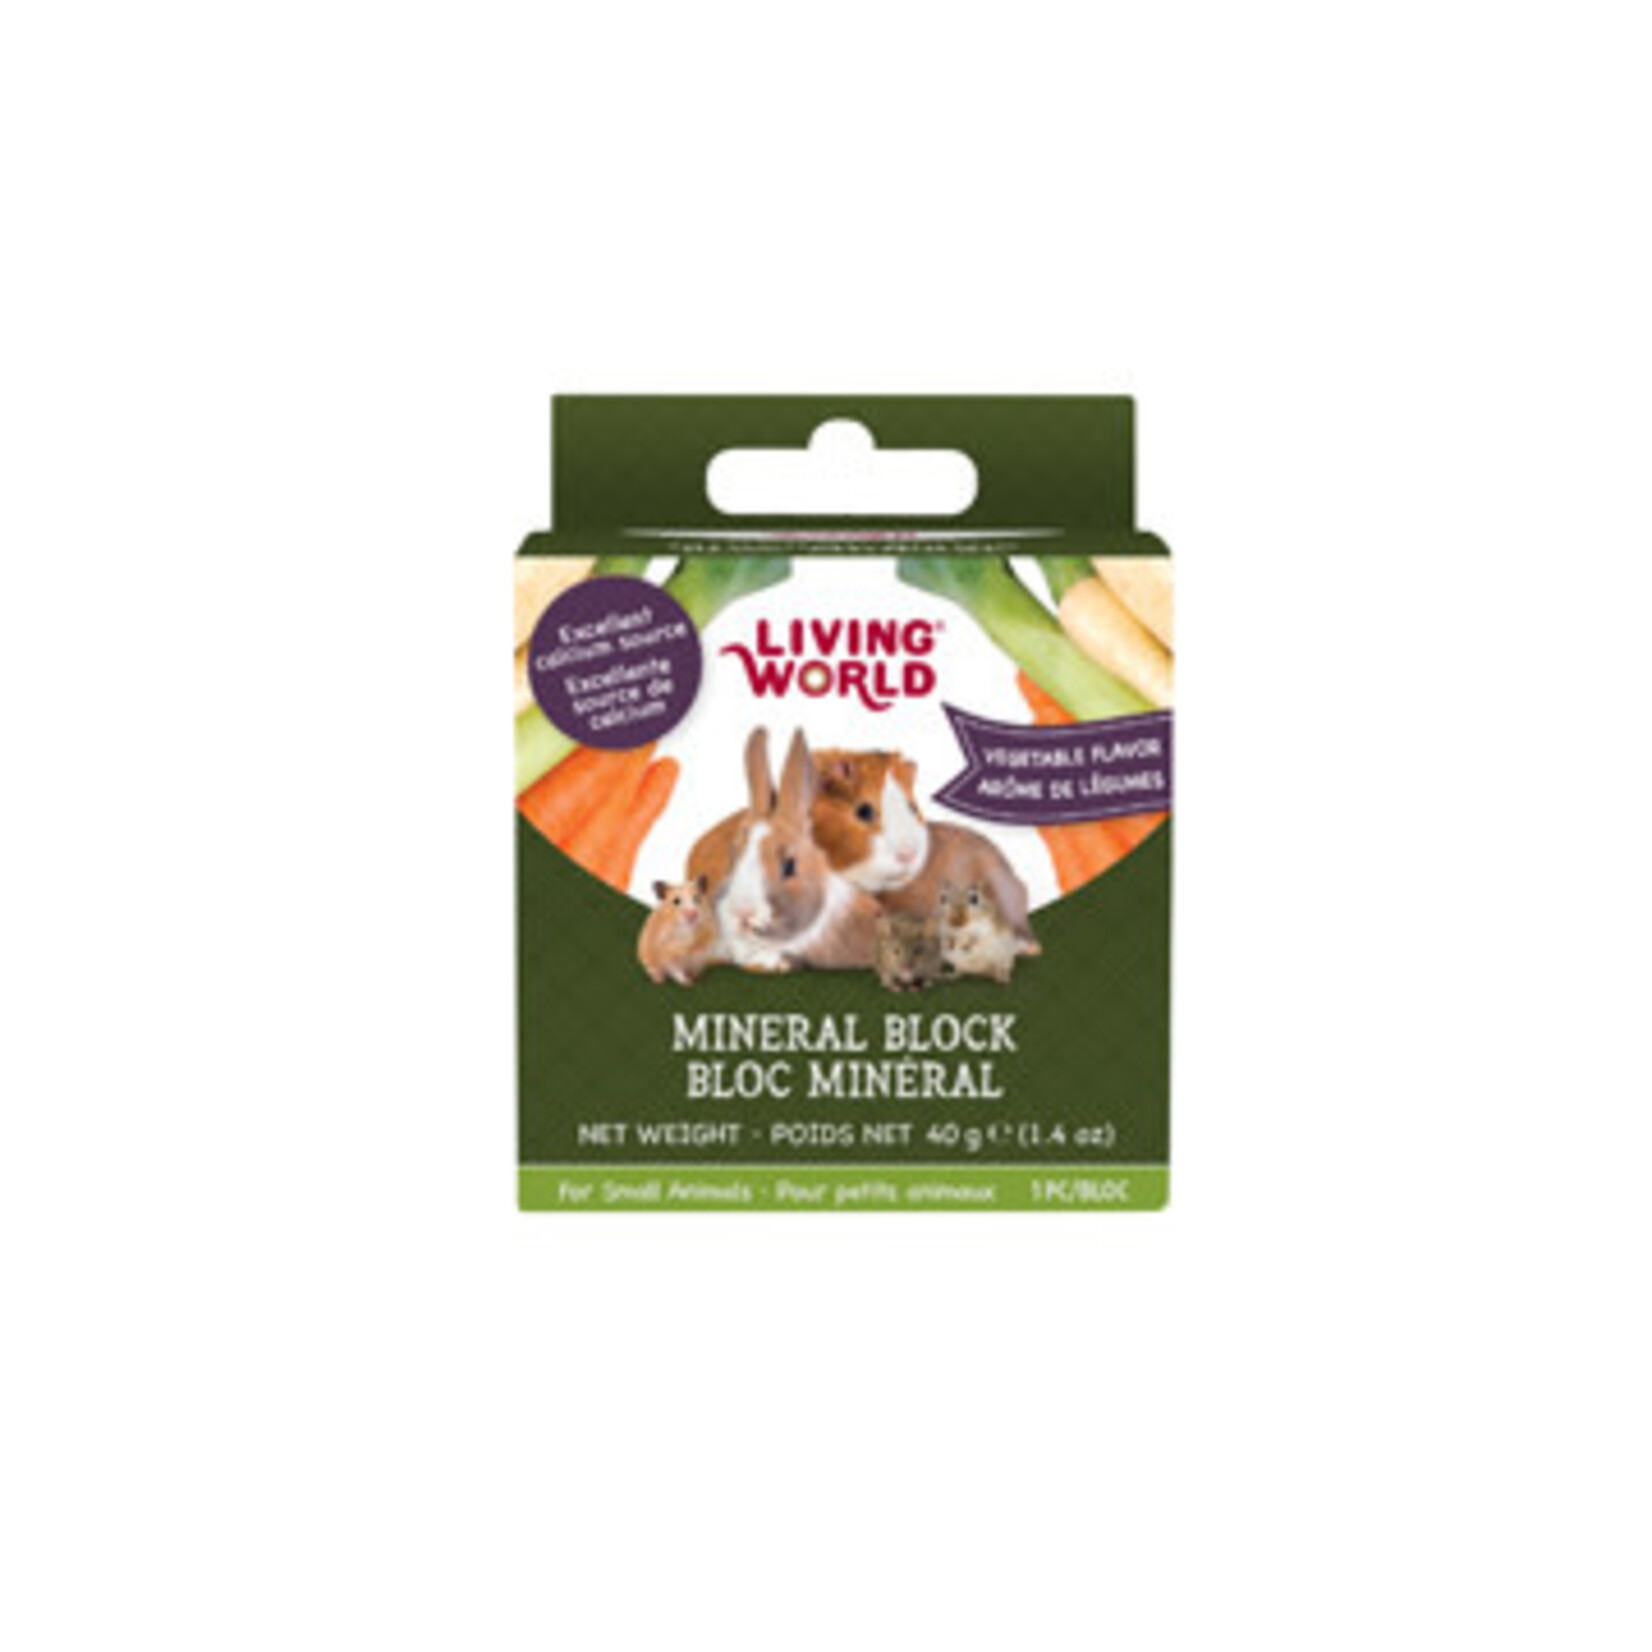 LIVING WORLD Living World Small Animal Mineral Blocks - Vegetable Flavour - Small - 40 g (1.4 oz)